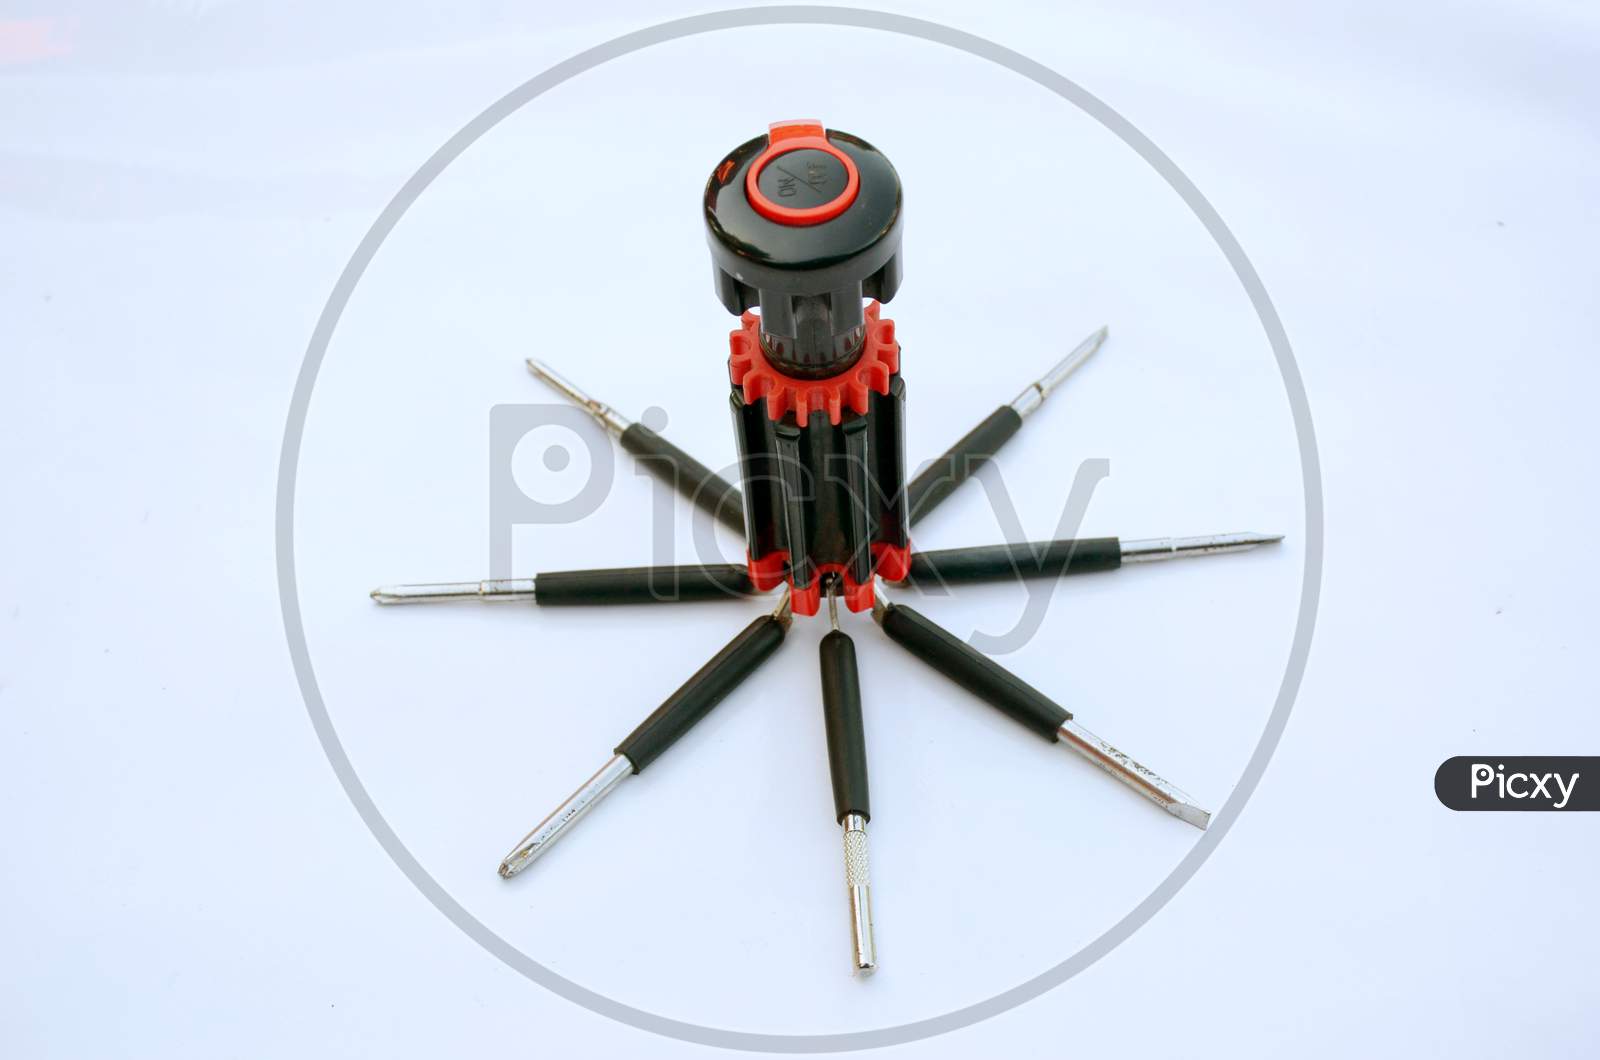 The Old Black Red Screw Driver Isolated On White Background.